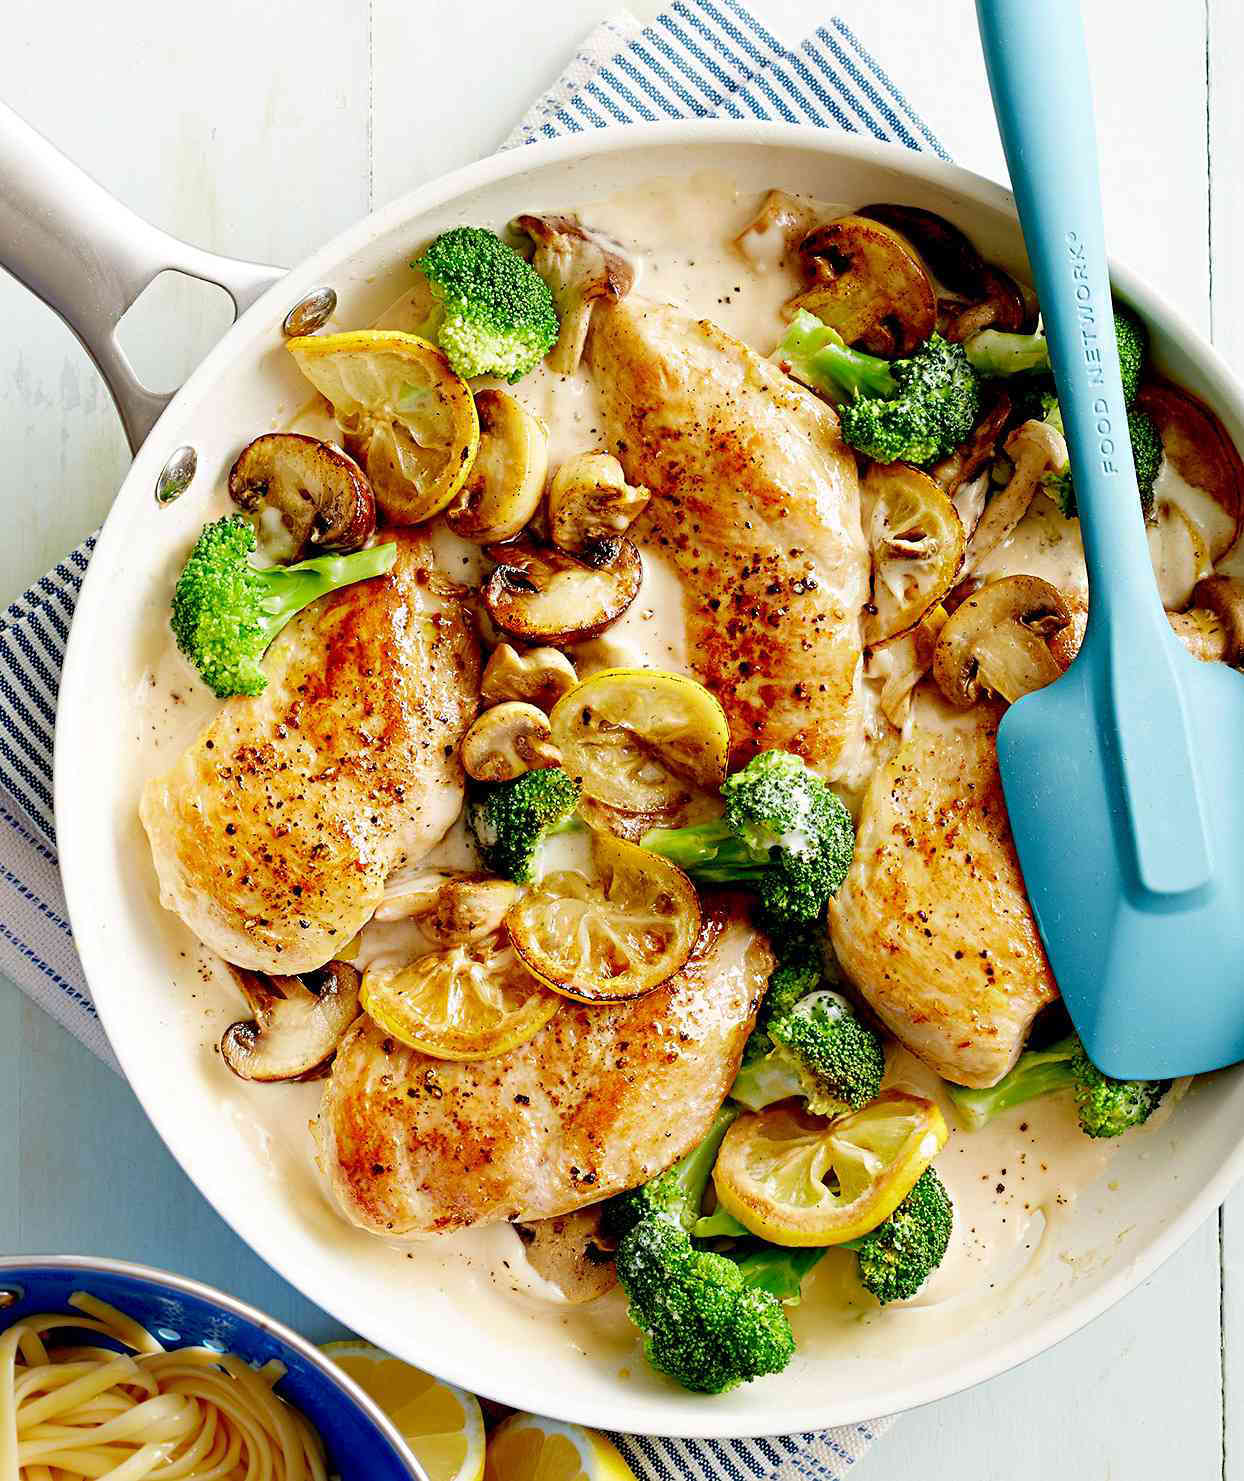 Easy Chicken and Broccoli You'll Be Making on Repeat